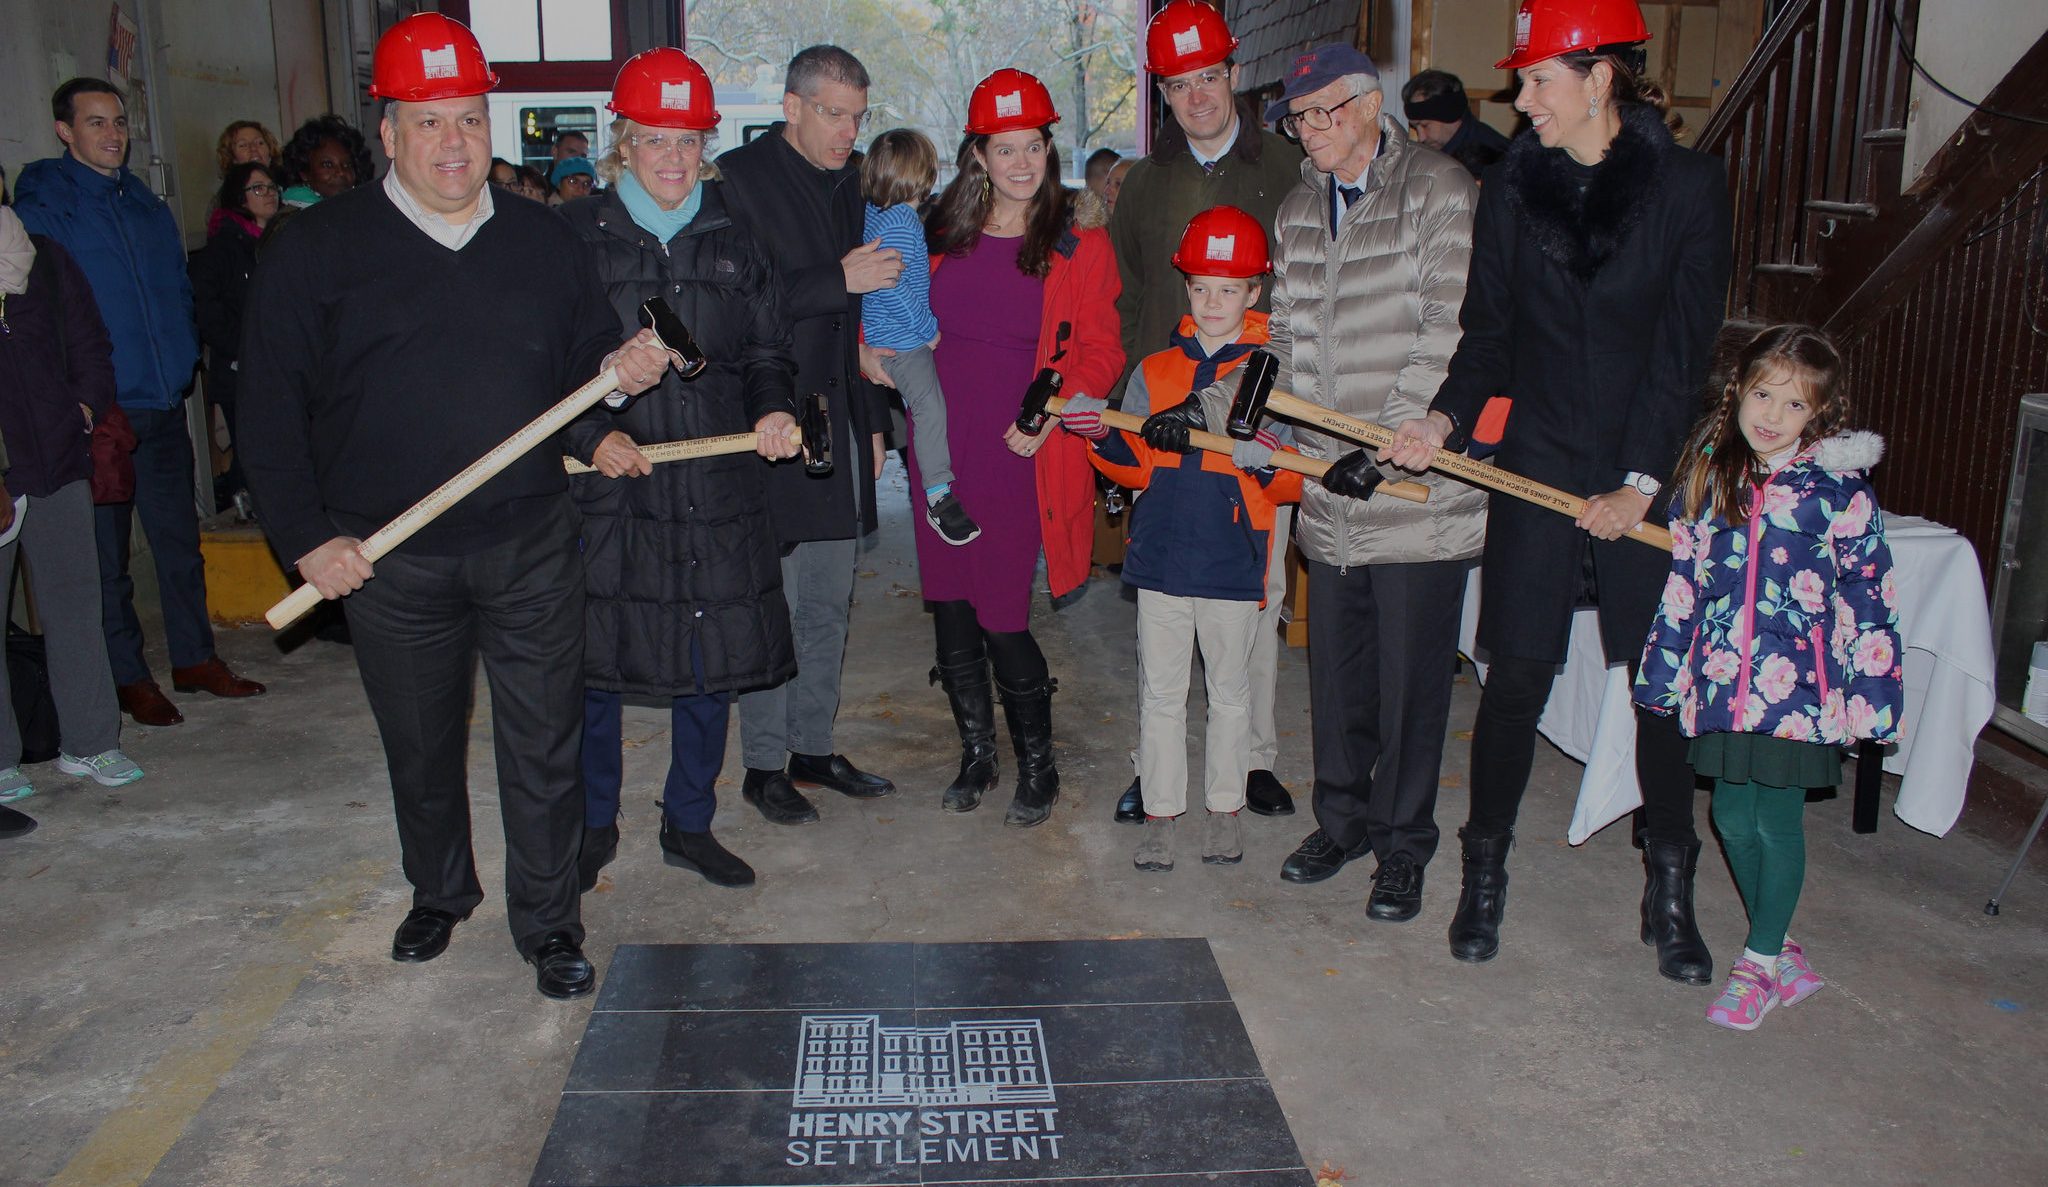 David Garza and funders break ground at firehouse